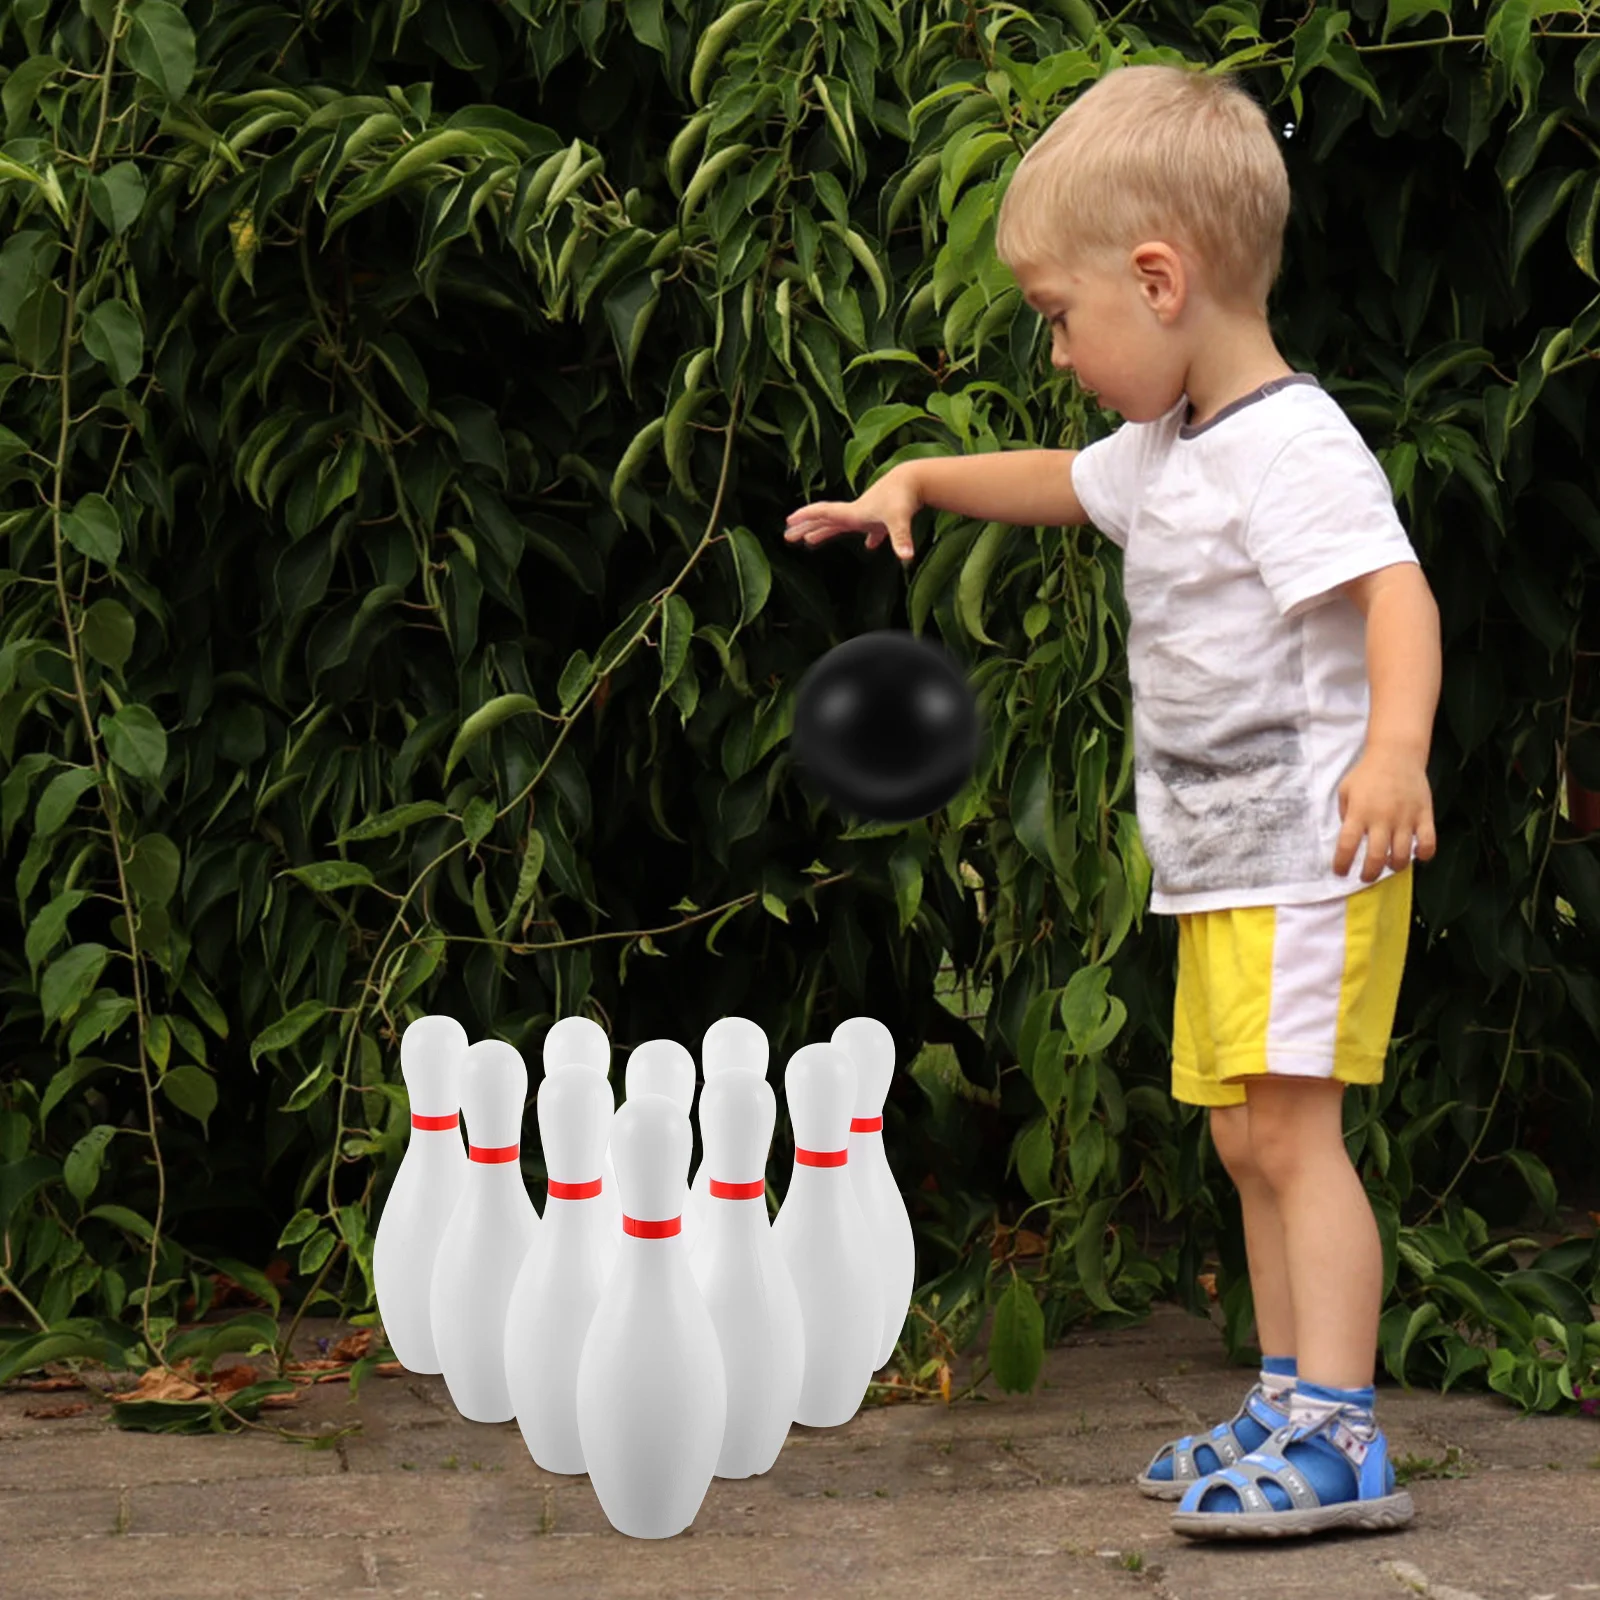 Toys Plasitc Bowling Play Set Fun Bowling Games Parent Children Interactive Toy for Home School (White)